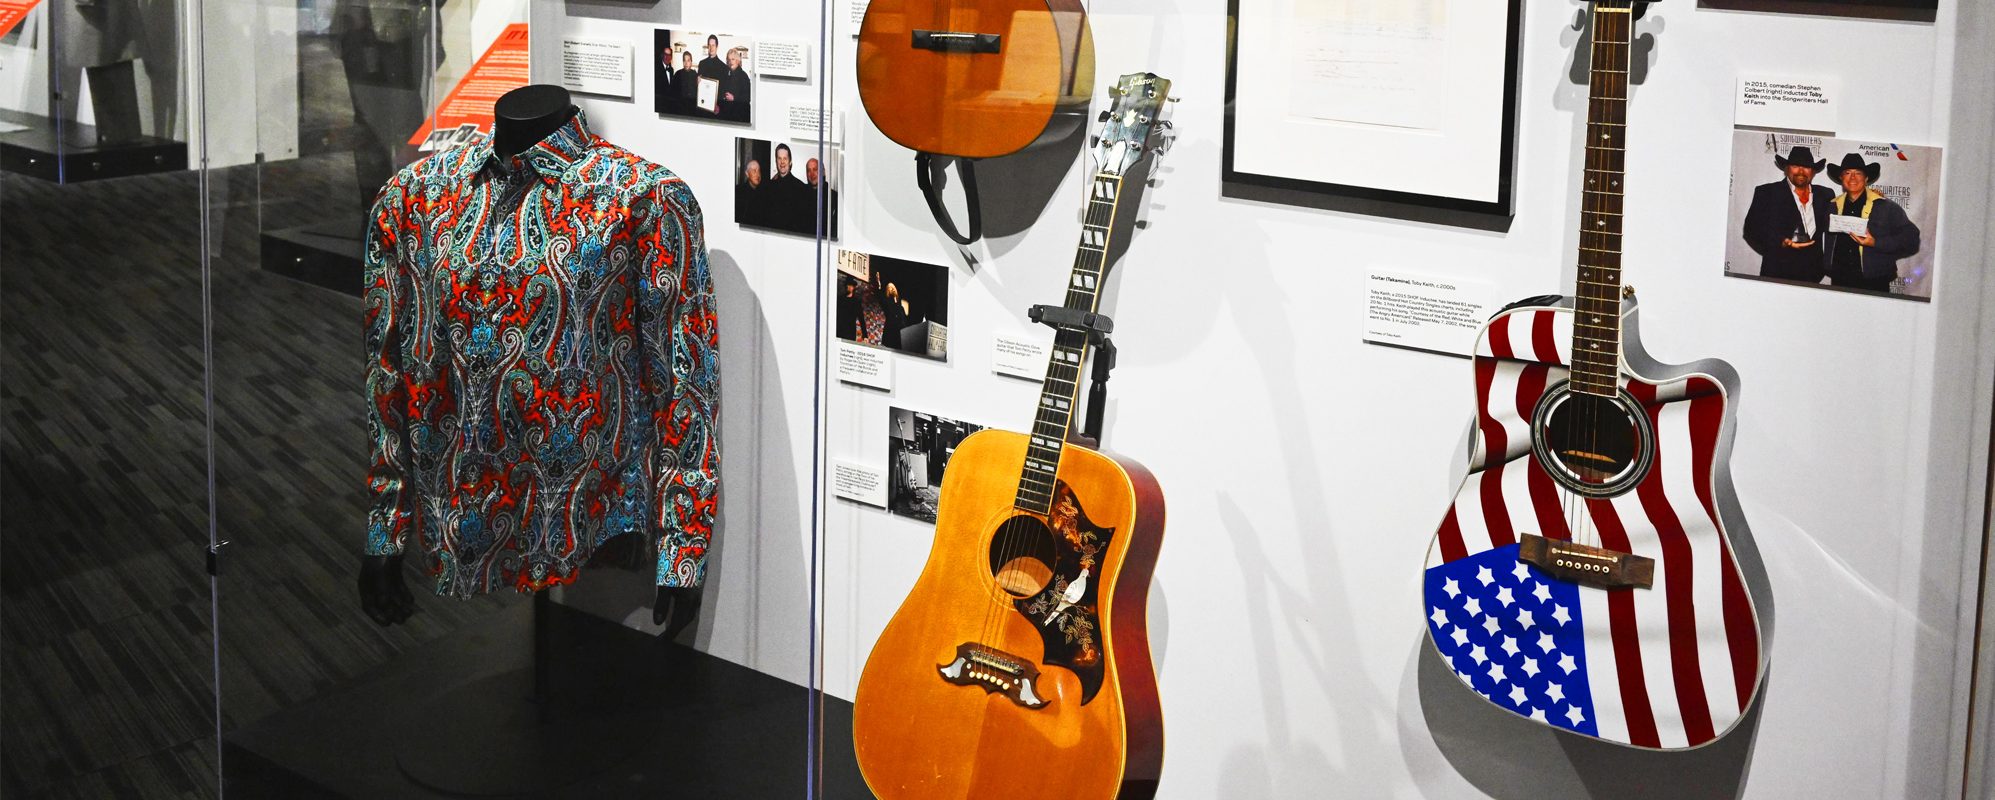 Songwriters Hall of Fame Unveils New Exhibit “The Power of Song”